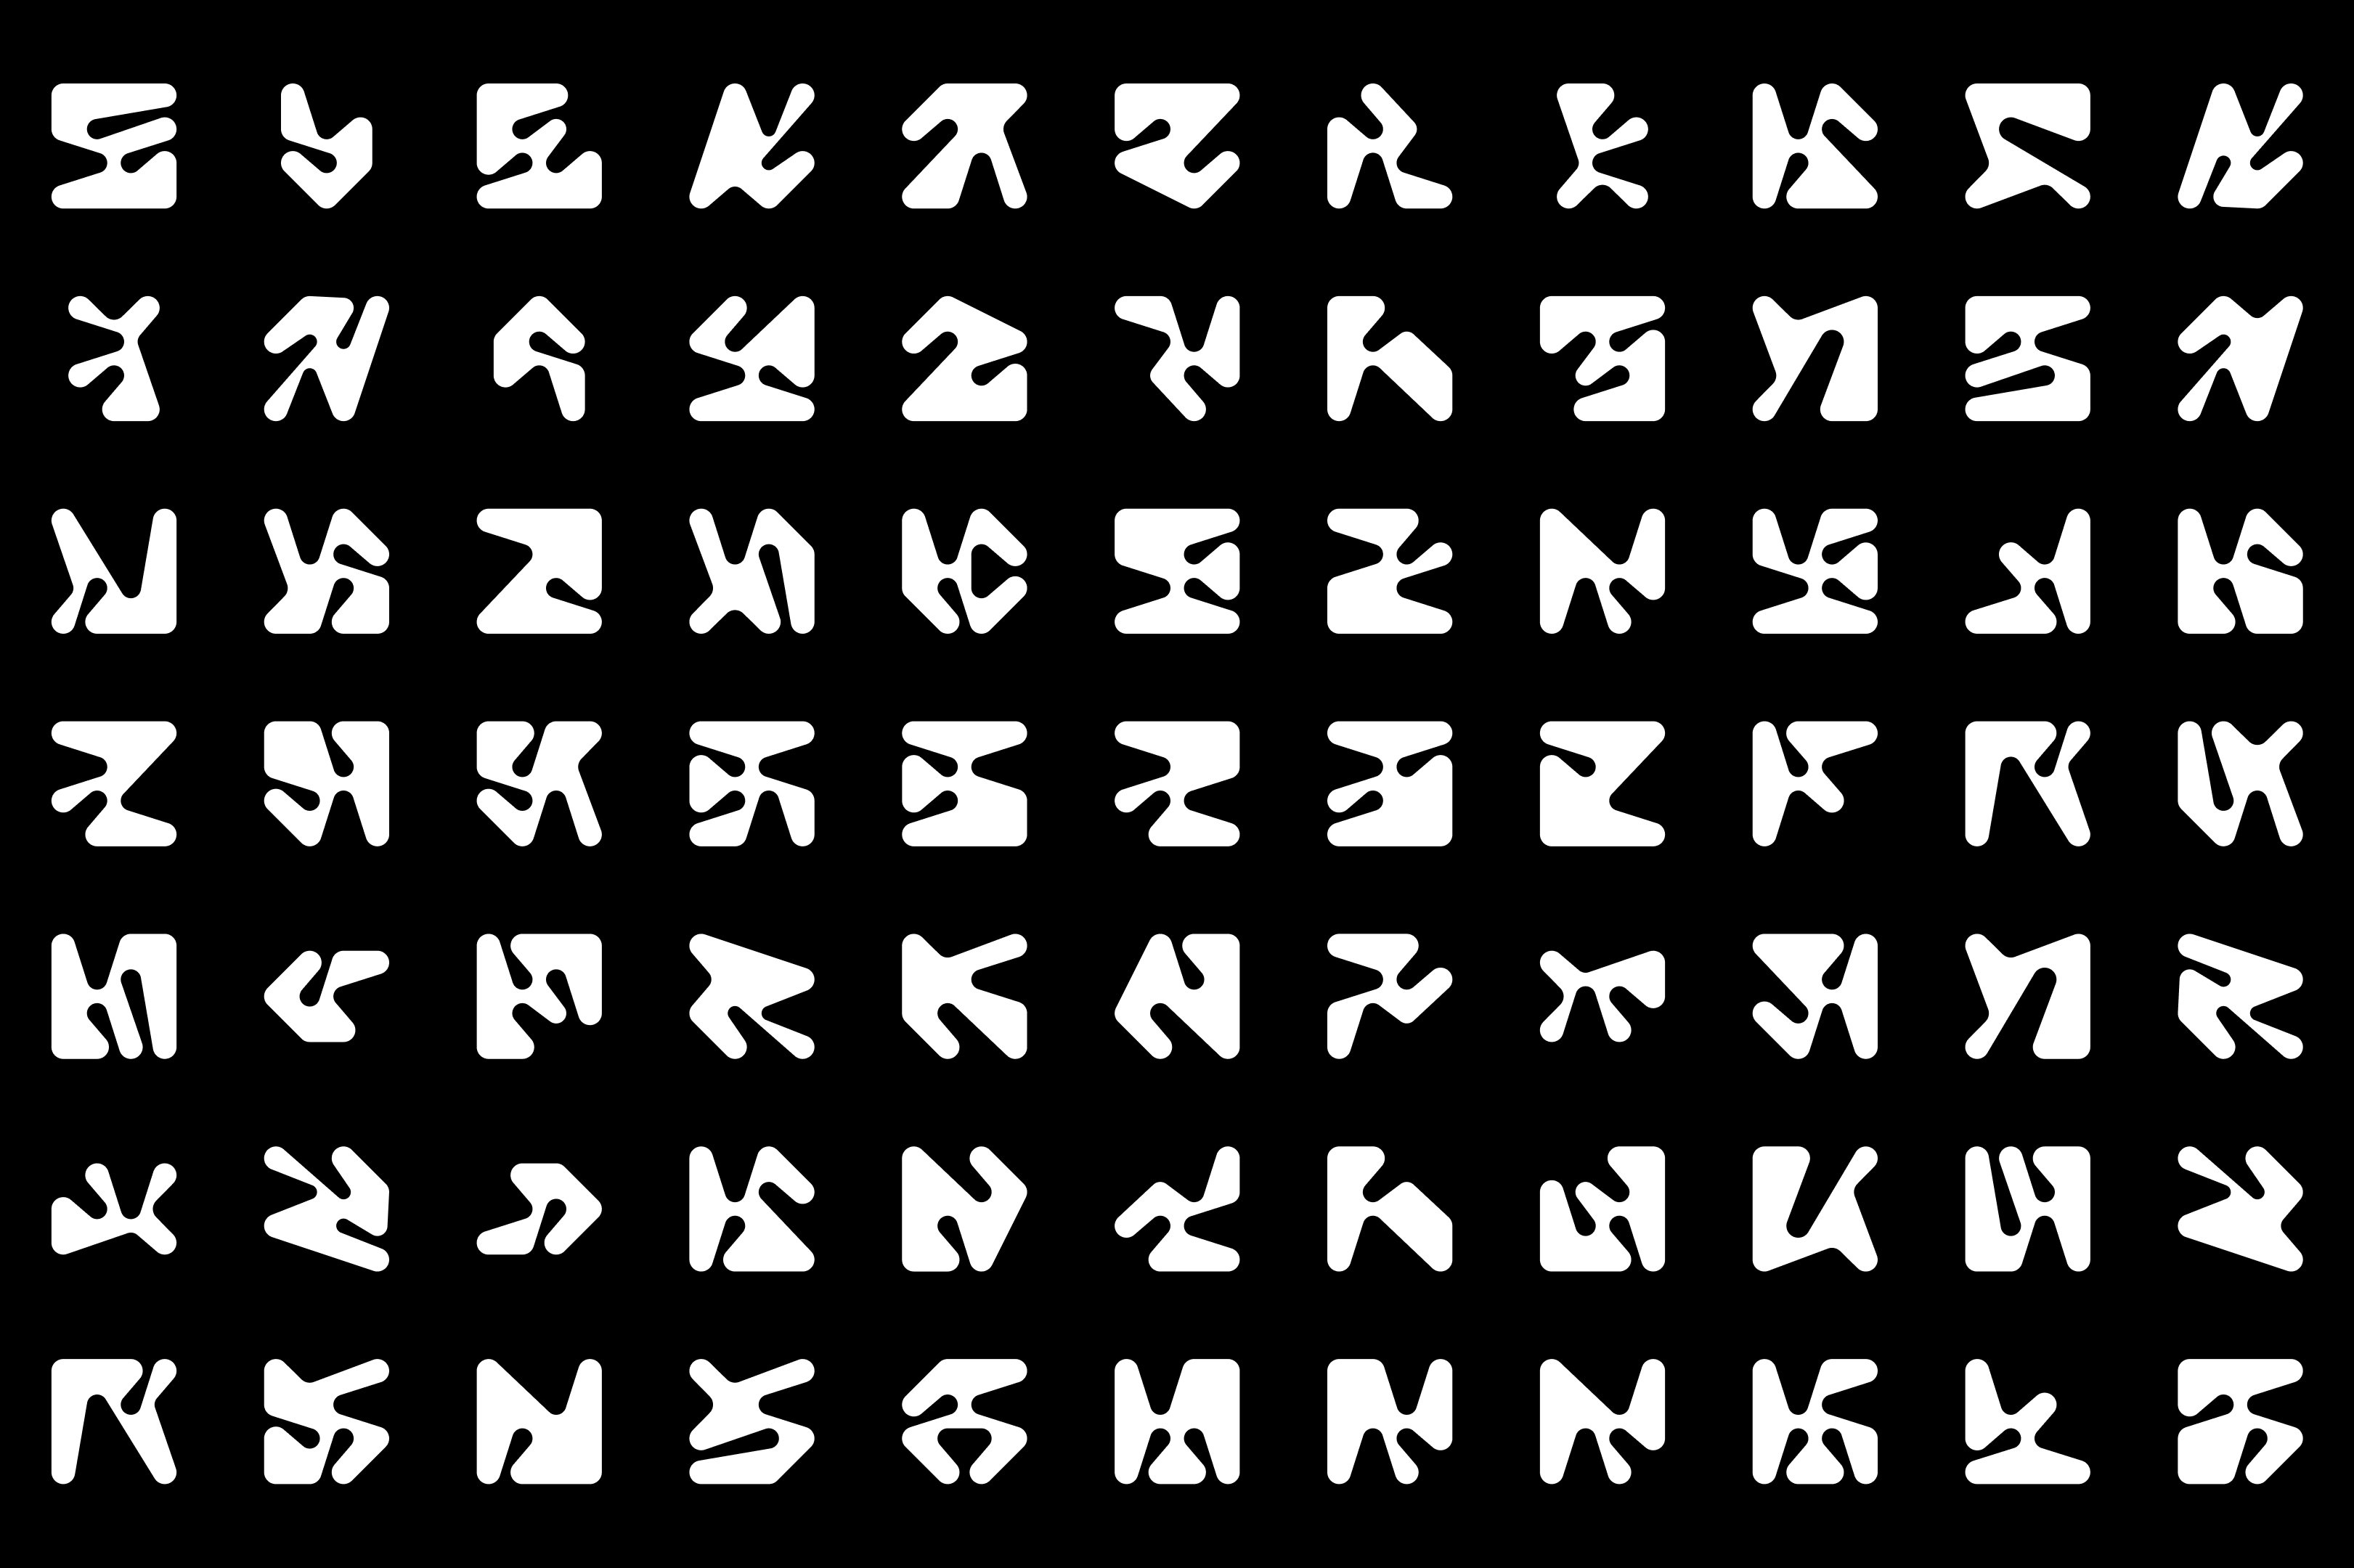 Generative logo design by ANTI for The Norwegian Research Council